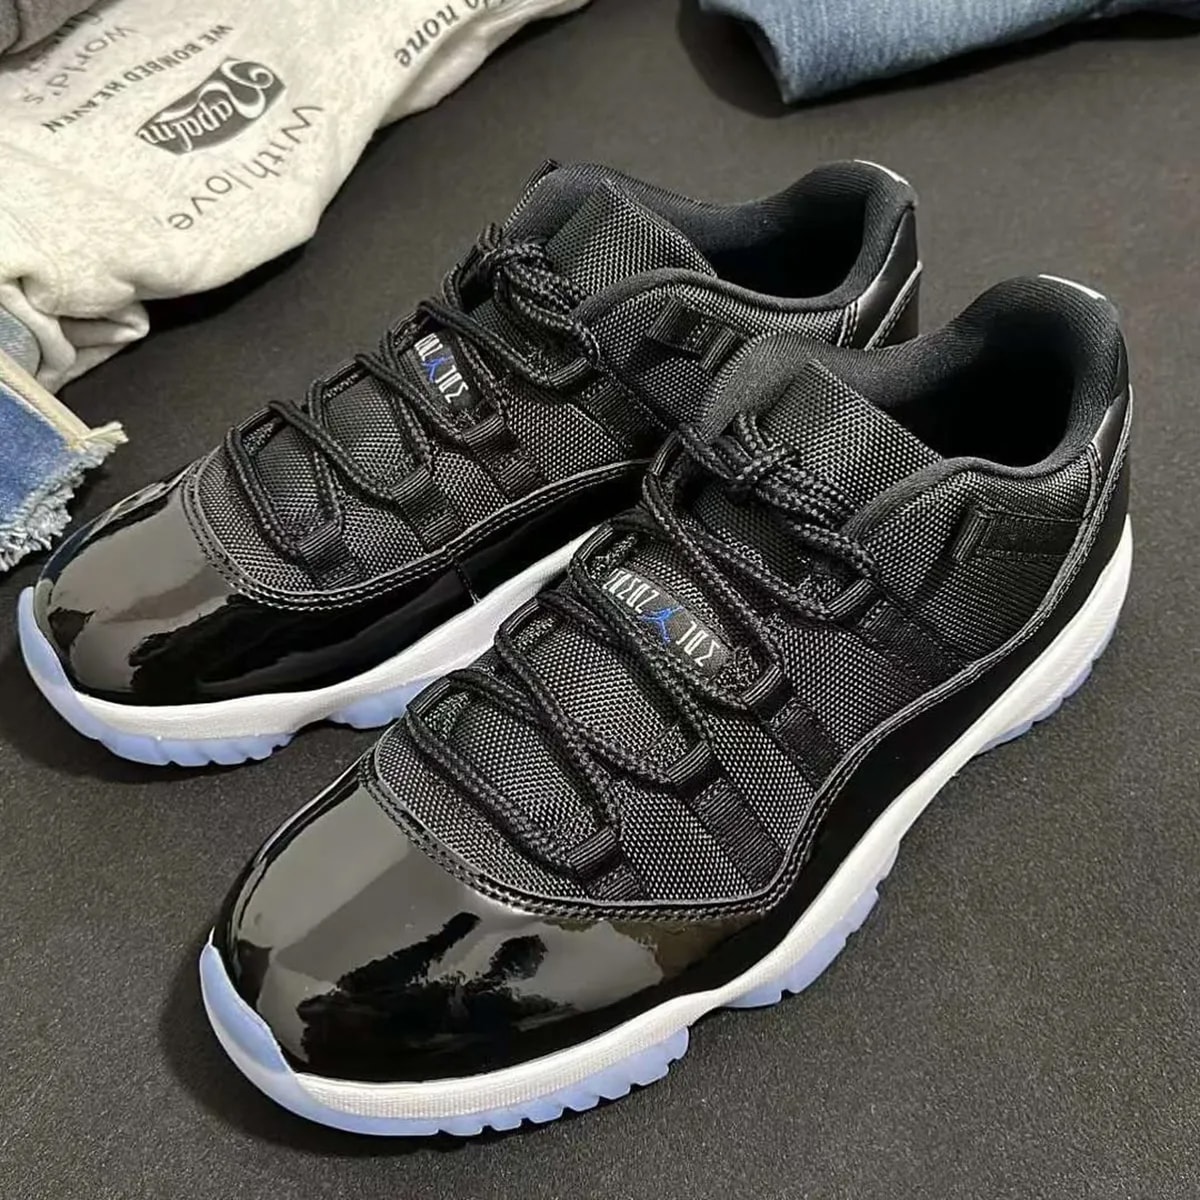 Air Jordan 11 Low Space Jam FV5104-004 Release Date info store list buying guide photos price